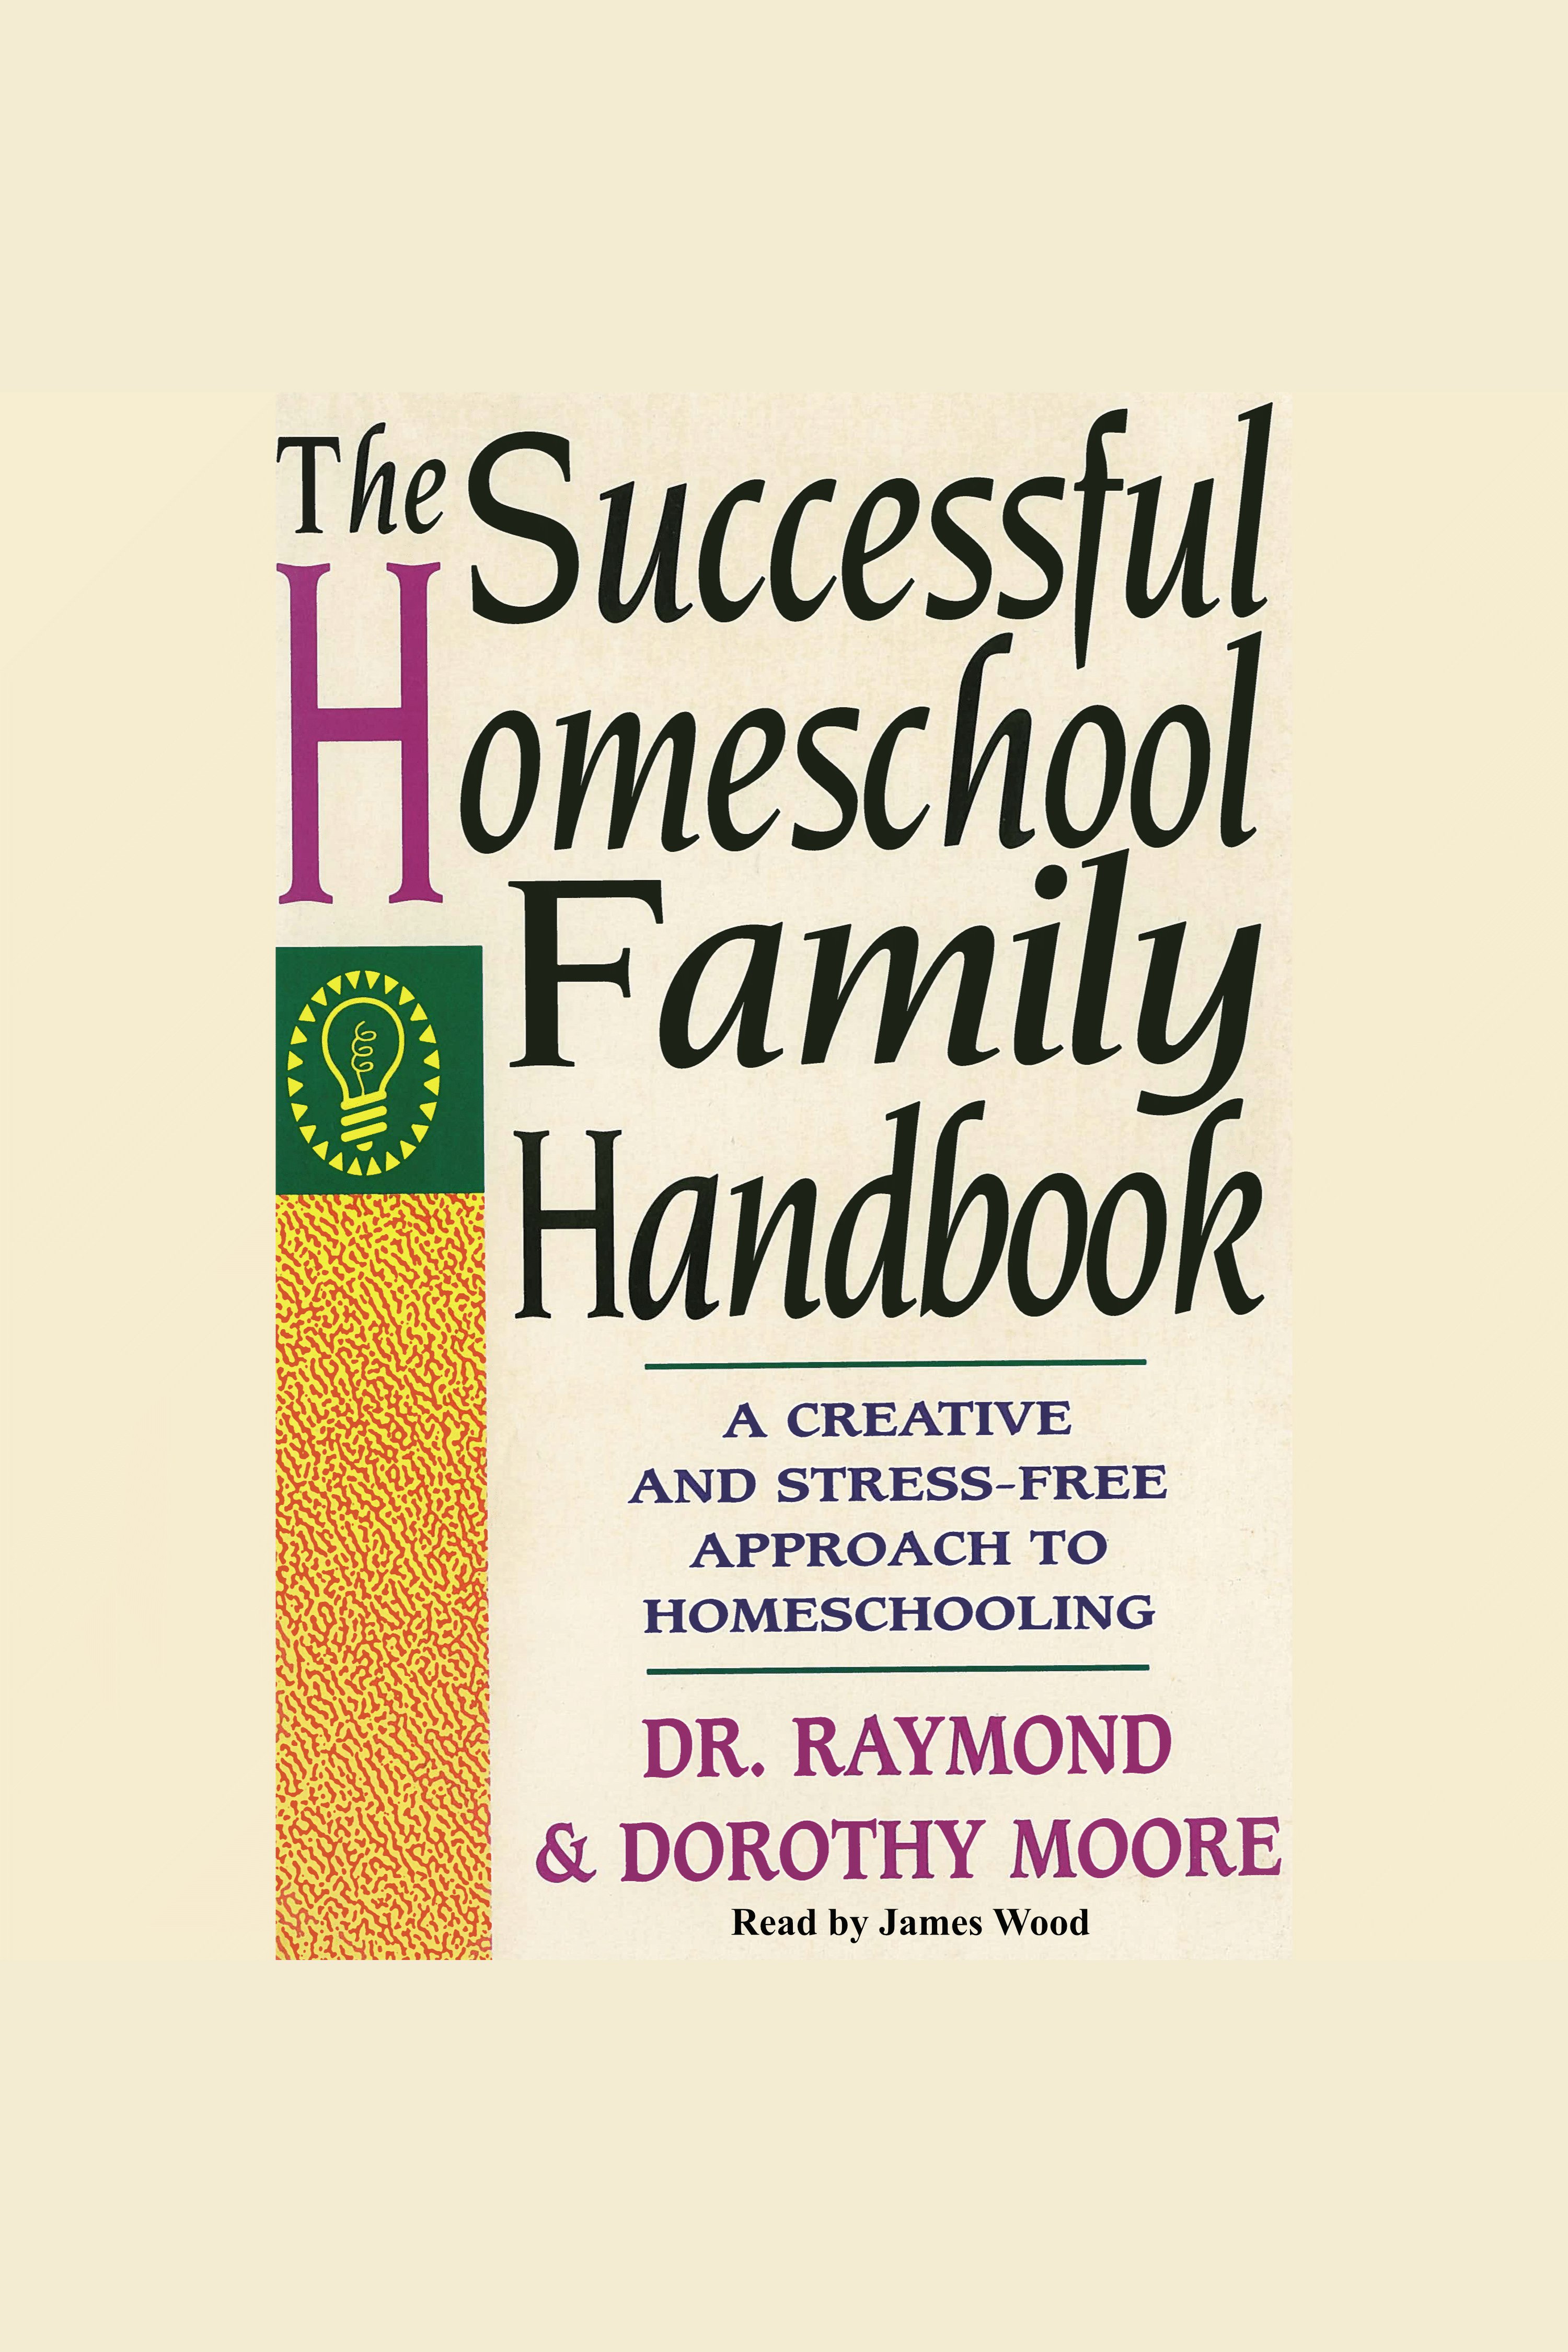 The successful homeschool family handbook a creative and stress-free approach to homeschooling cover image